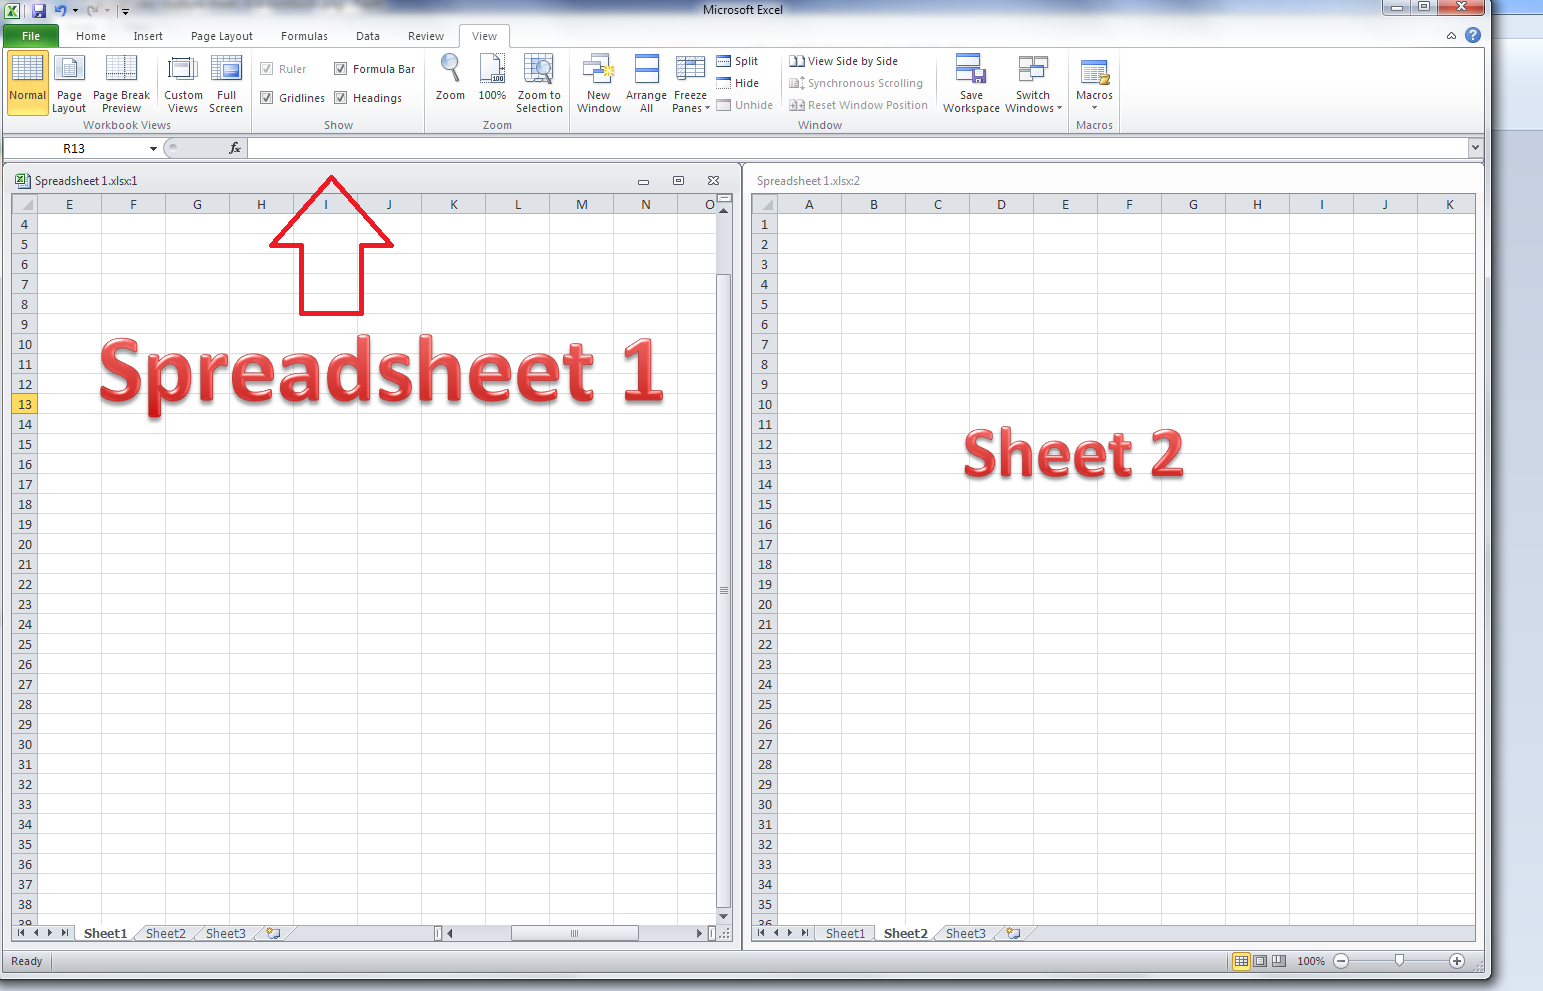 What Can You Do With Excel Spreadsheets Regarding How Do I View Two Sheets Of An Excel Workbook At The Same Time